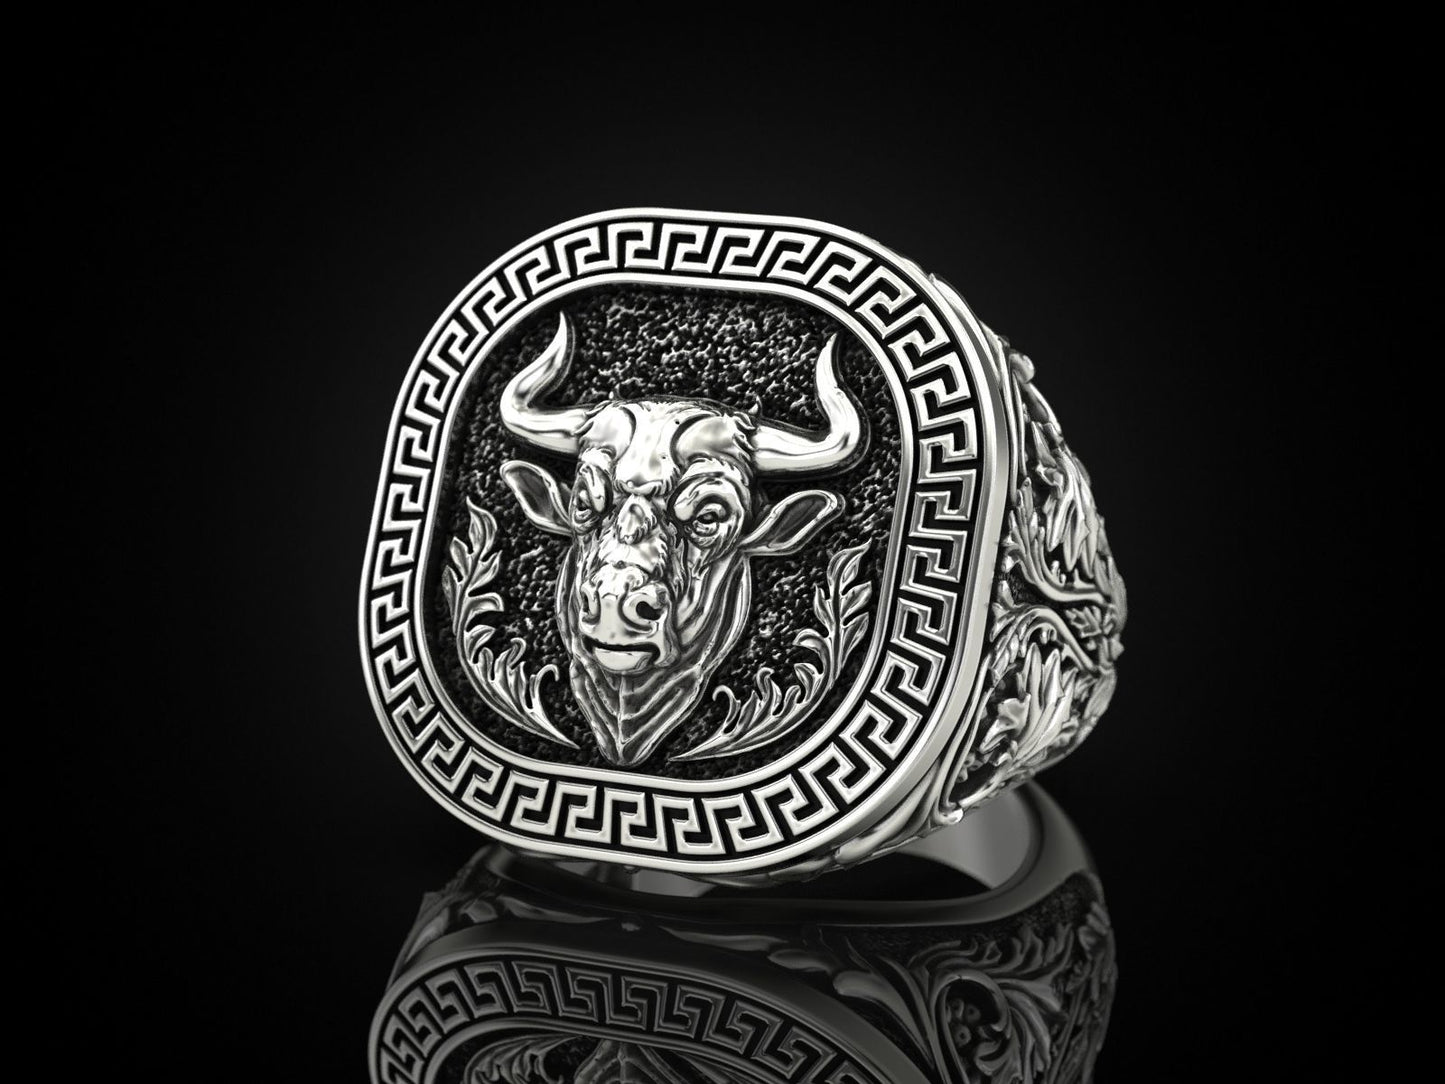 RARE PRINCE by CARAT SUTRA | Unique Taurus Zodiac Designed Bull Ring | 925 Sterling Silver Oxidized Ring | Men's Jewelry | With Certificate of Authenticity and 925 Hallmark - caratsutra